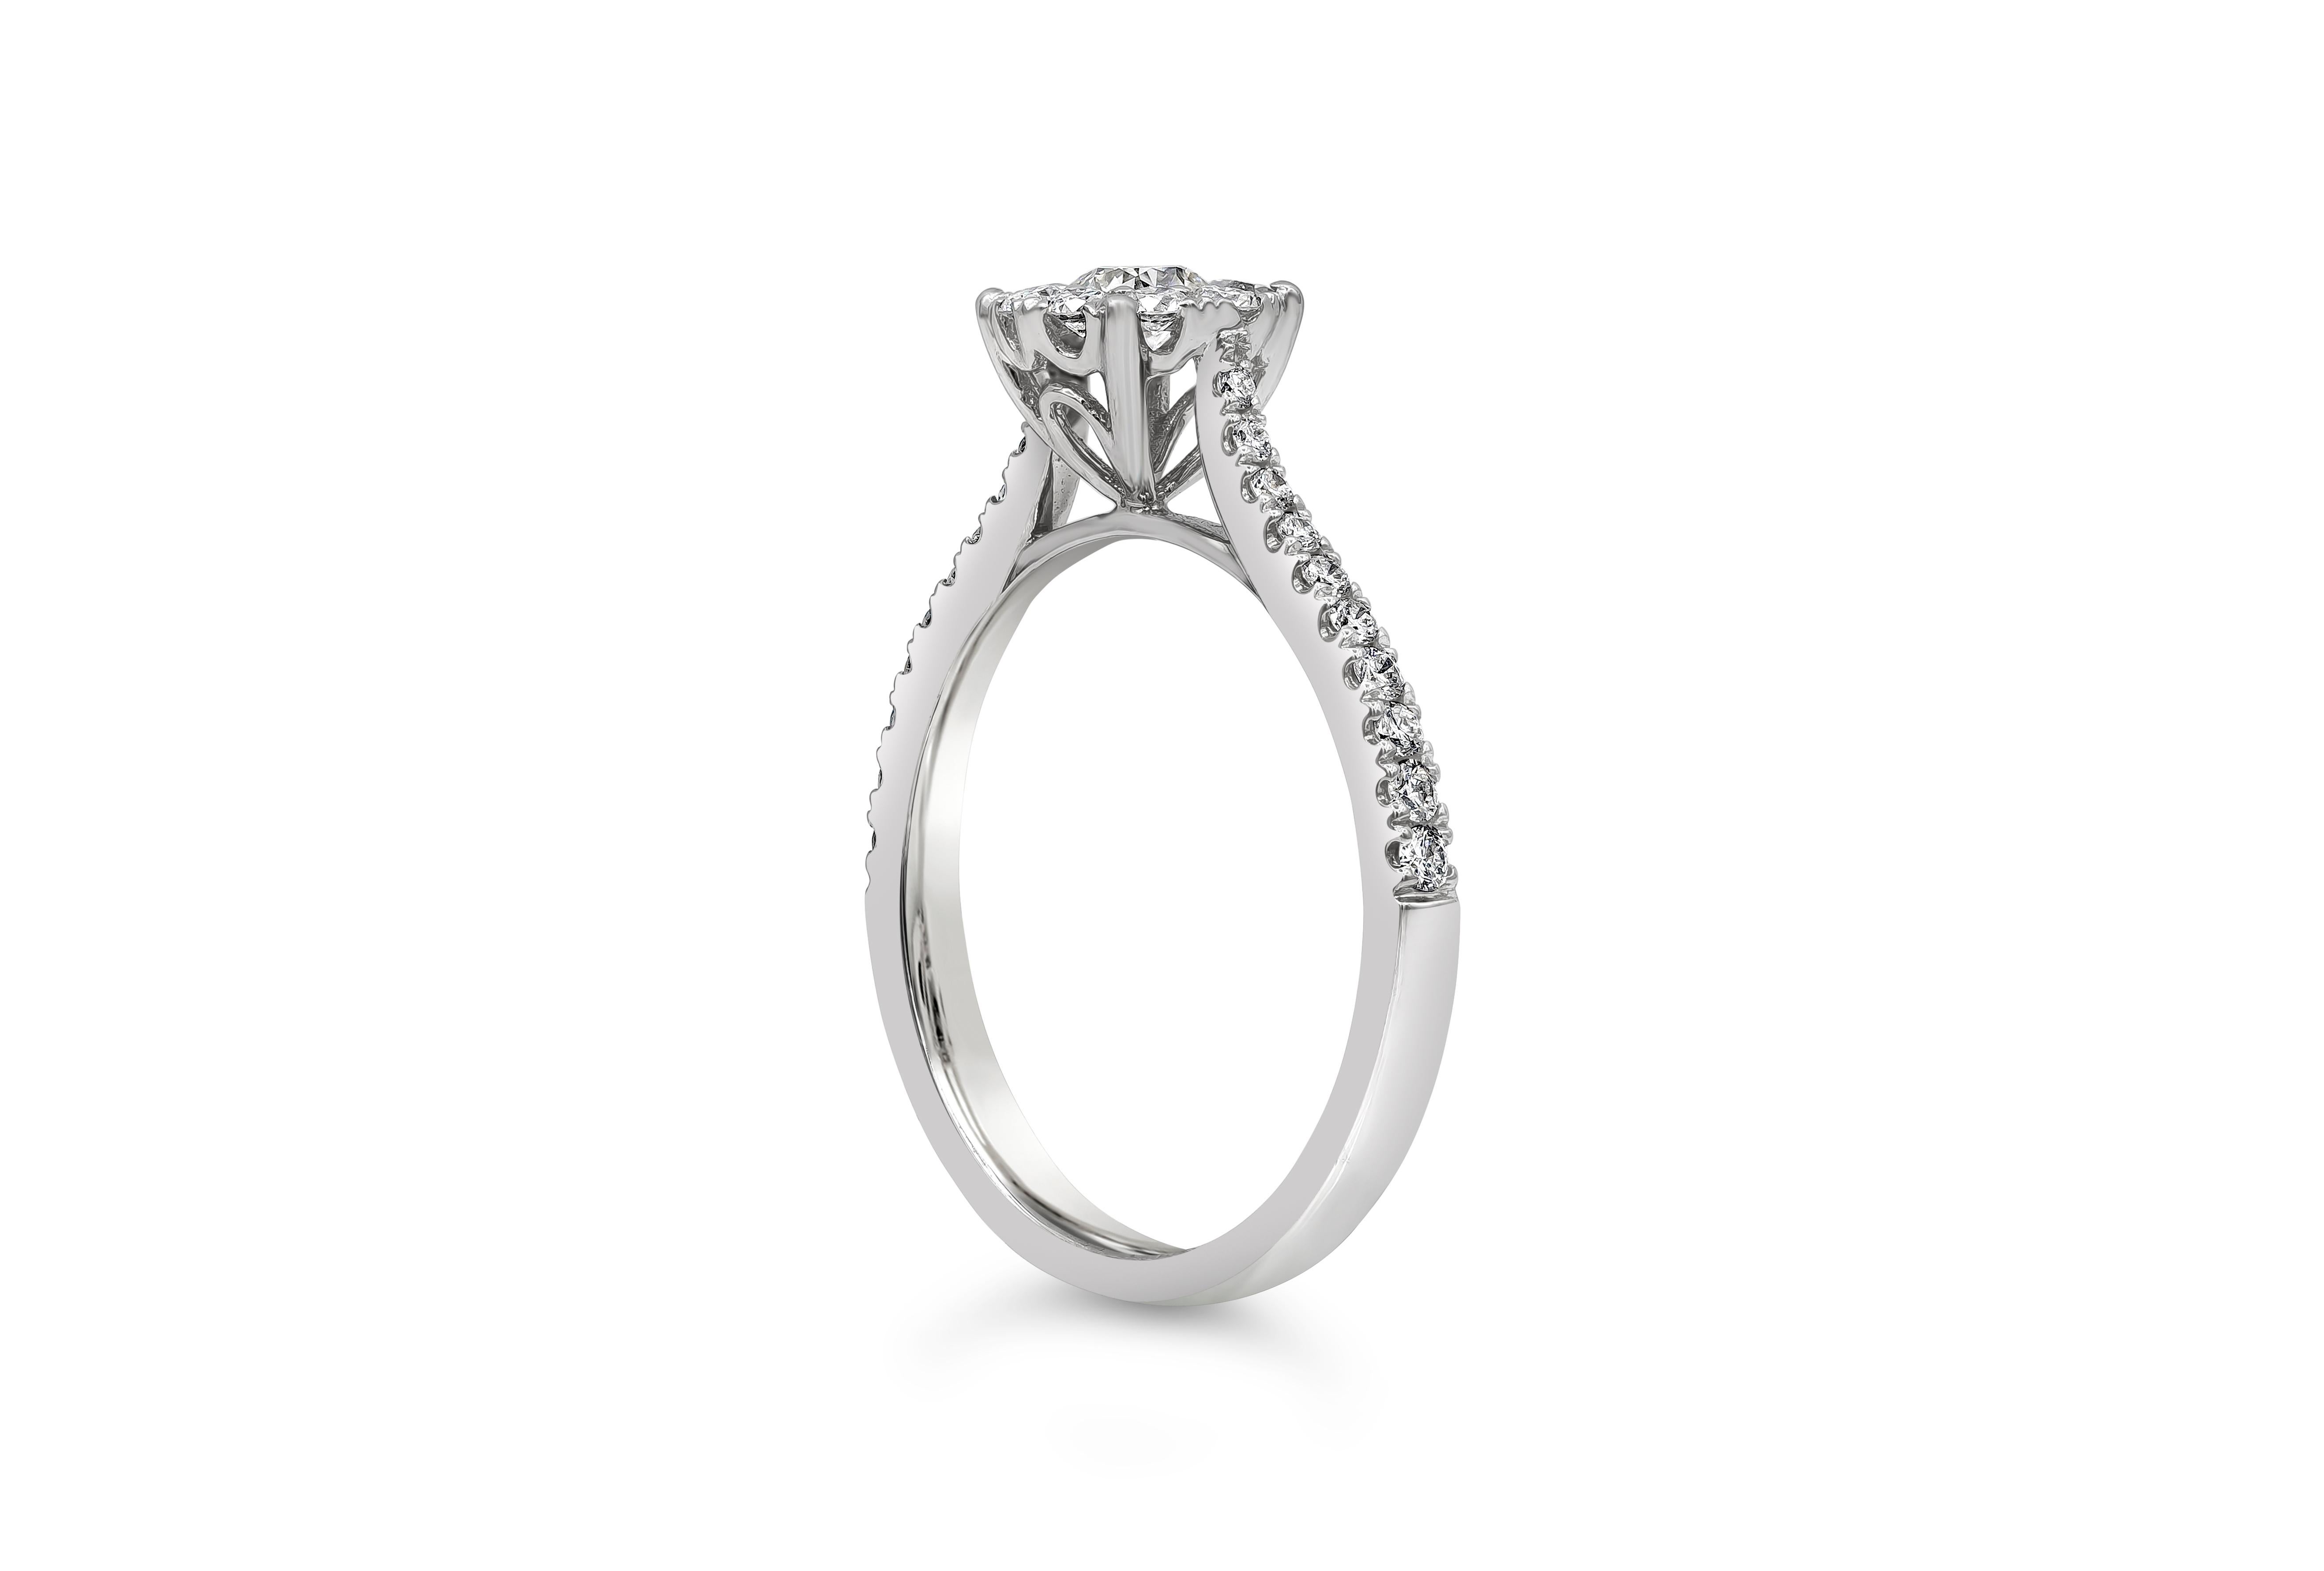 A classy and attractive halo engagement ring features a 0.19 carats round cut diamond surrounded by a single row of round diamonds. The shank of the ring also set with round diamonds. Diamonds weigh 0.39 carats total. Set in 18k white gold.

Style